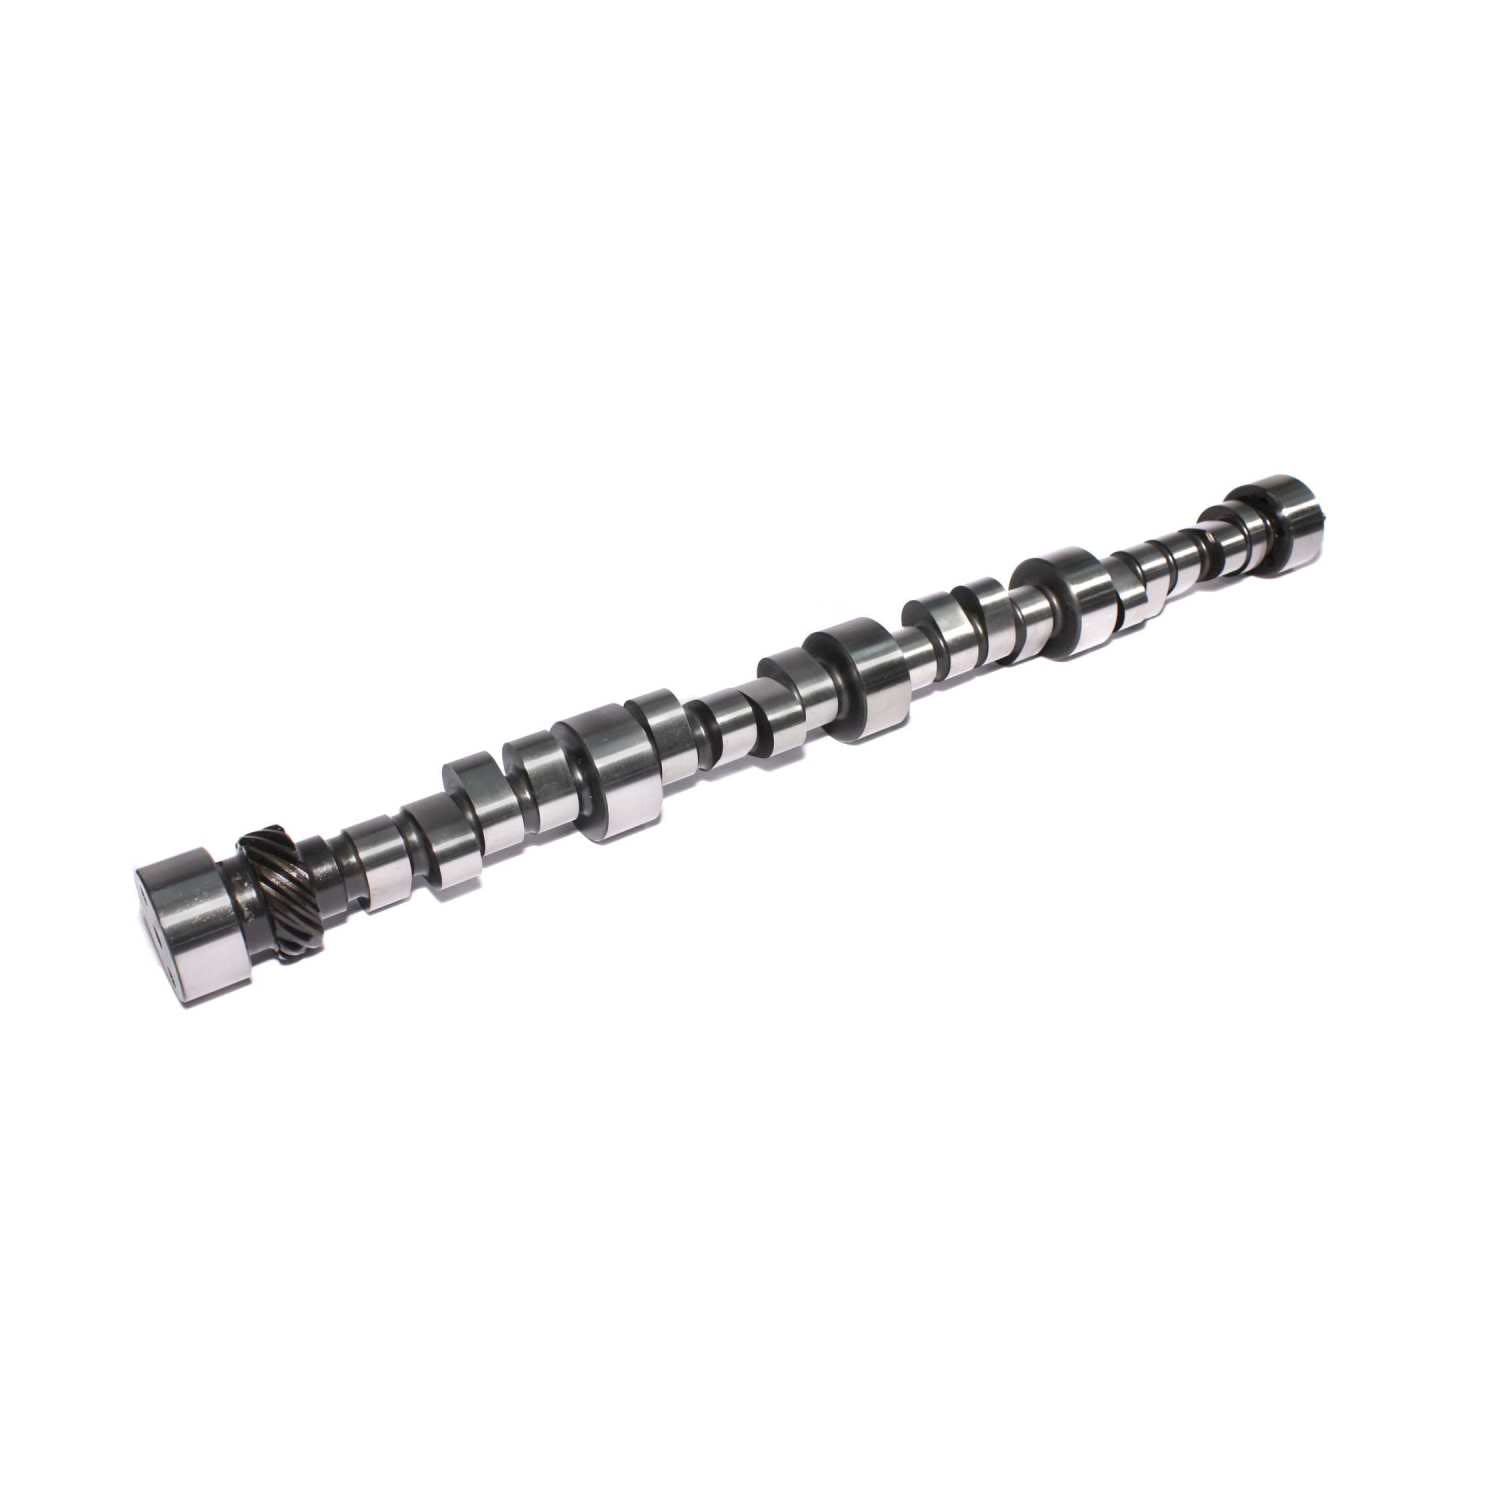 Competition Cams 11-742-9 Drag Race Xtreme RX Camshaft